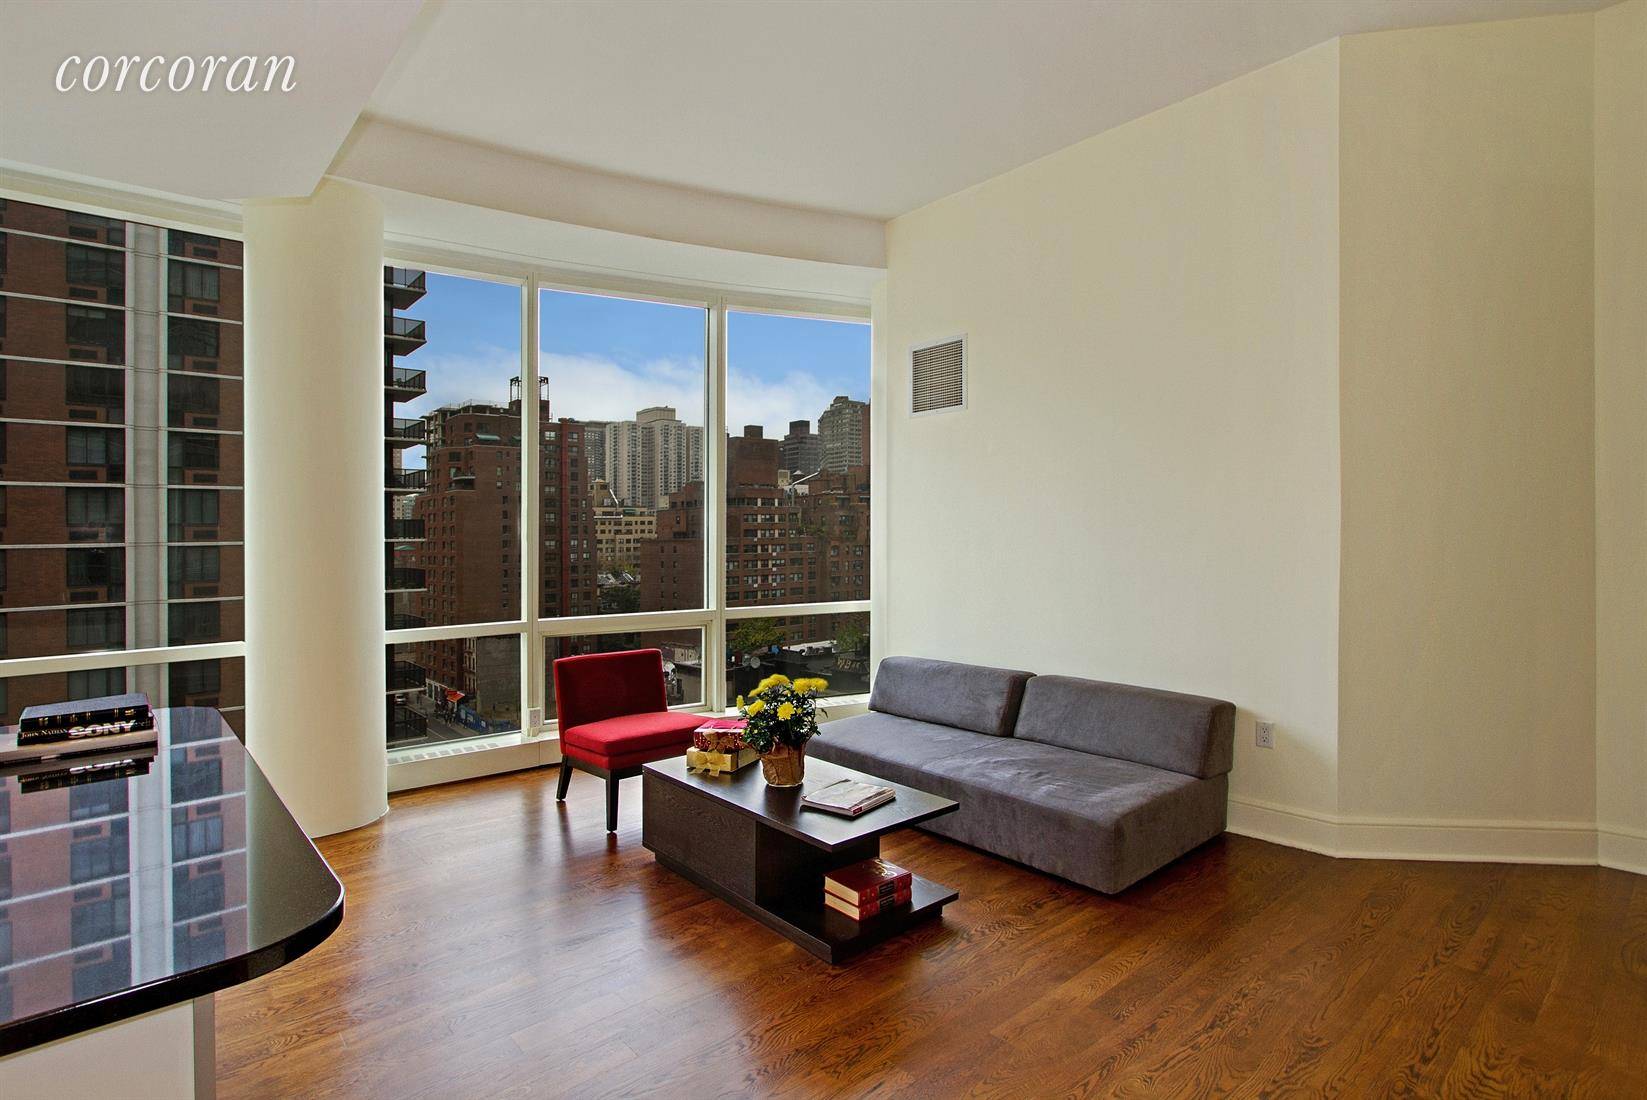 FURNISHED RENTAL. Welcome to 250 East 49th Street located on a quiet tree lined street in the heart of Midtown Manhattan !